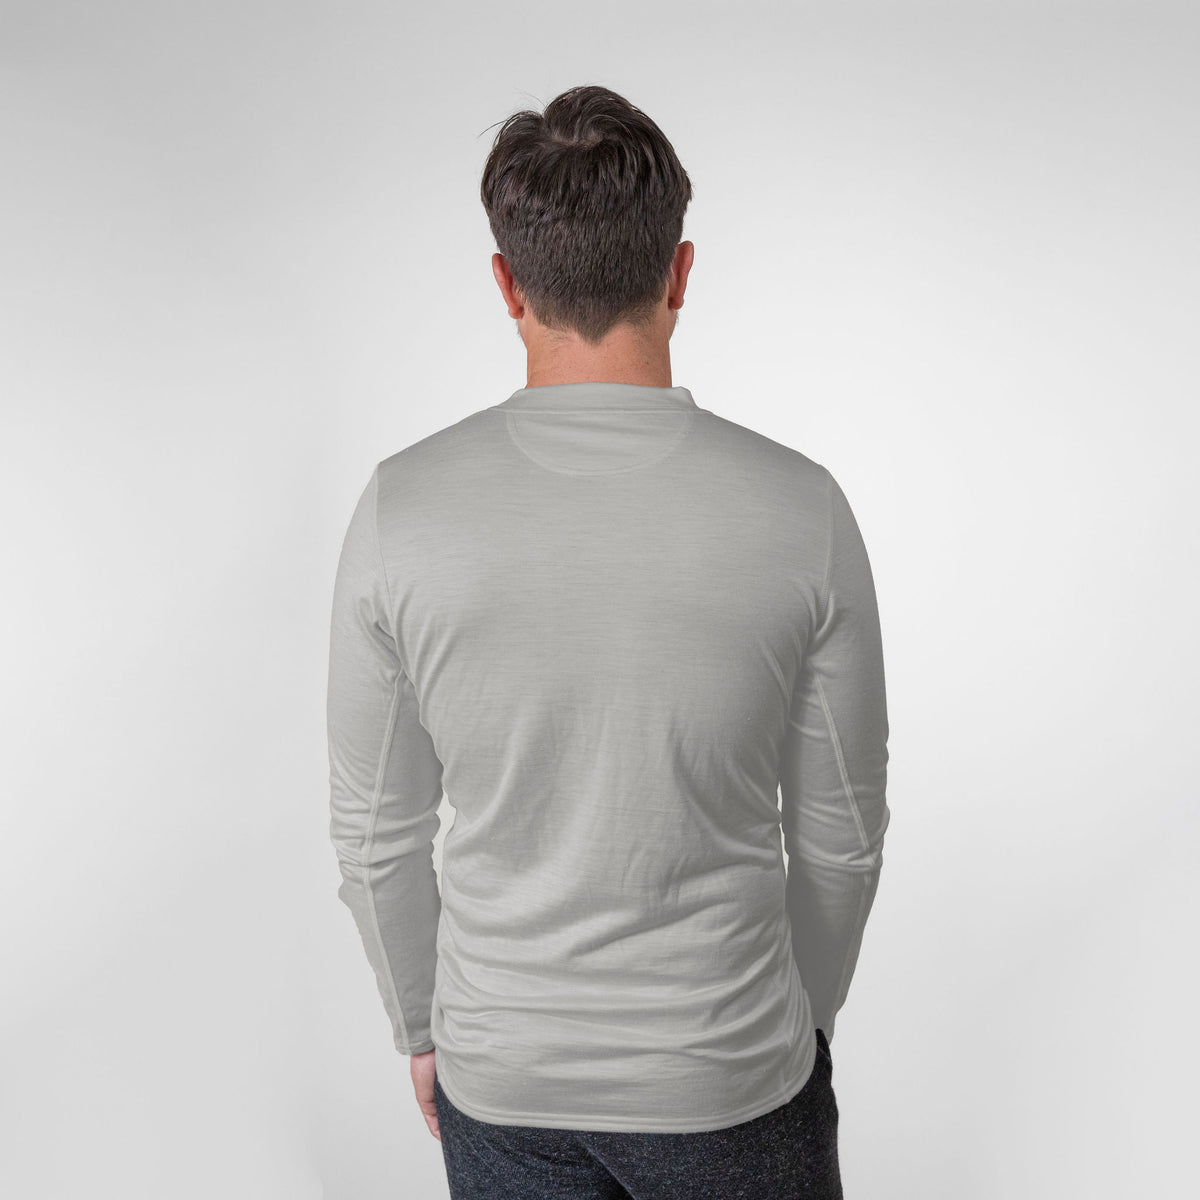 A man standing and facing away from the camera against a white background. He is wearing an Alpacas of Montana lightweight athletic activewear outerwear breathable moisture wicking antimicrobial soft comfortable exercise long sleeve natural white alpaca men&#39;s performance tee for running sports exercise work out hiking climbing camping hunting skiing biking